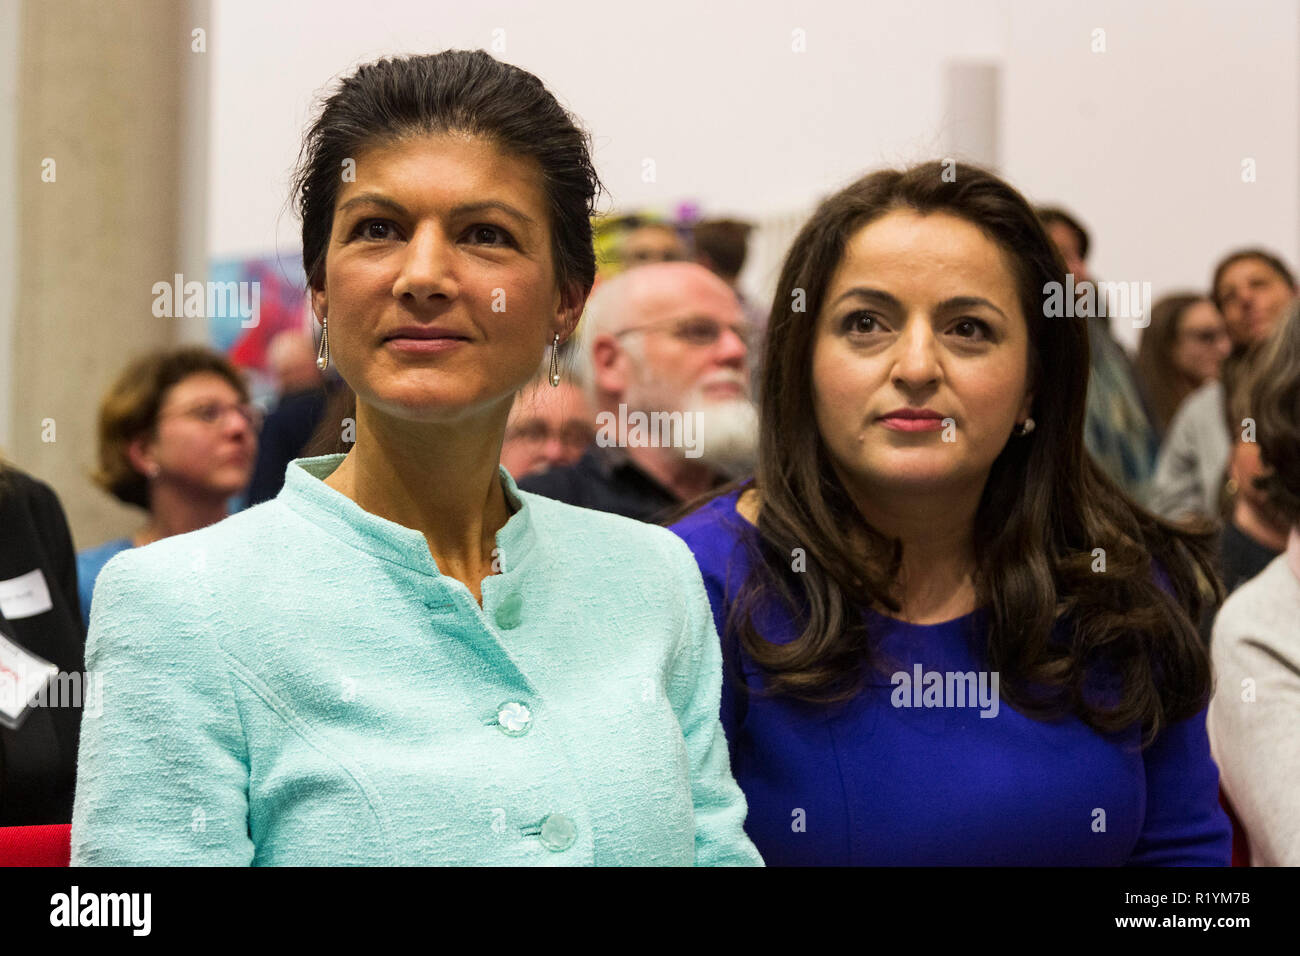 German politicians Sahra Wagenknecht and Sevim Dagdelen from Die Linke party attends a meeting of political movement Aufstehen in Bochum, Germany Stock Photo